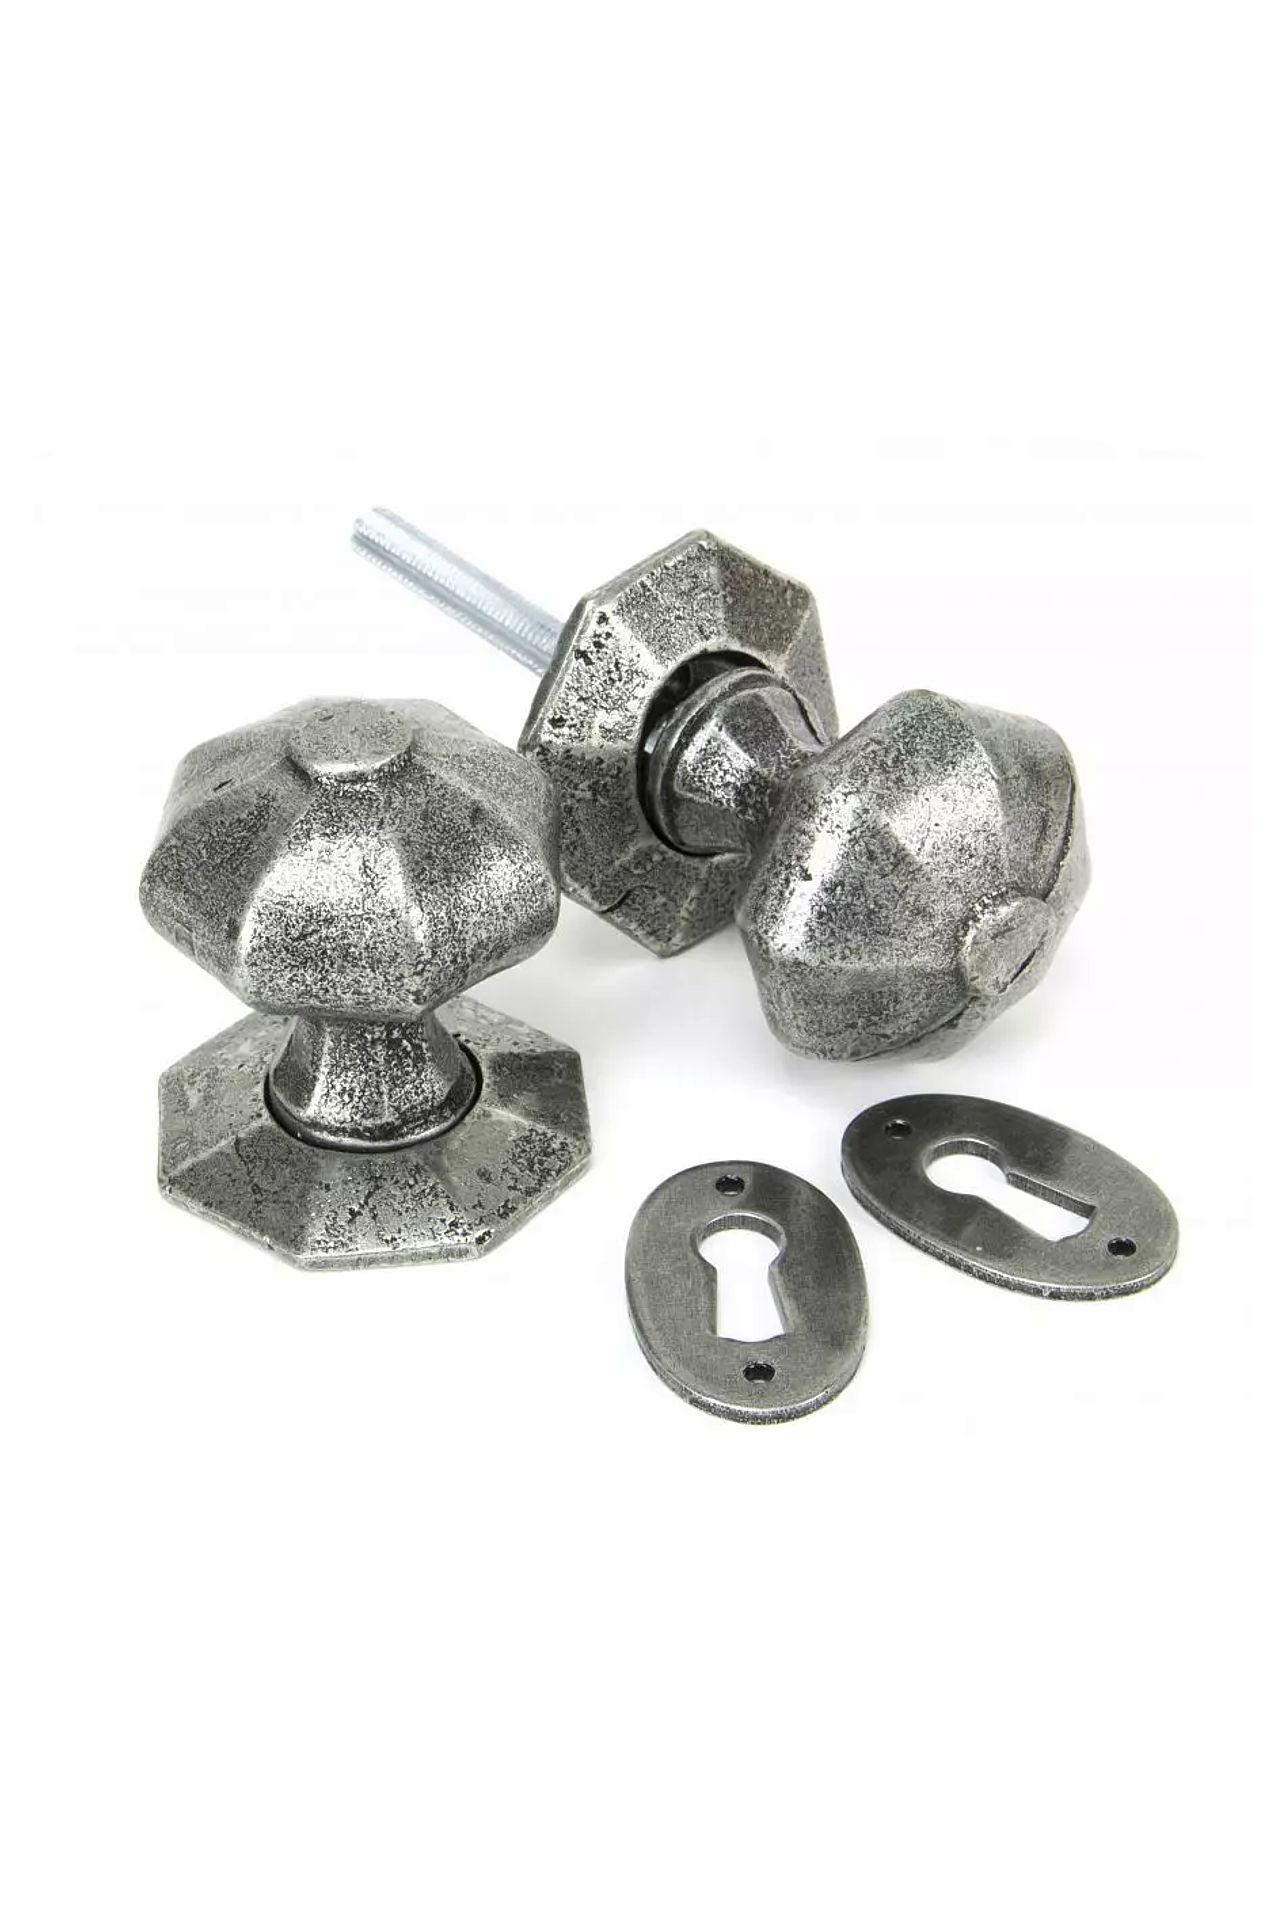 NEW From The Anvil Pewter Octagonal Mortice/Rim Knob Set #1